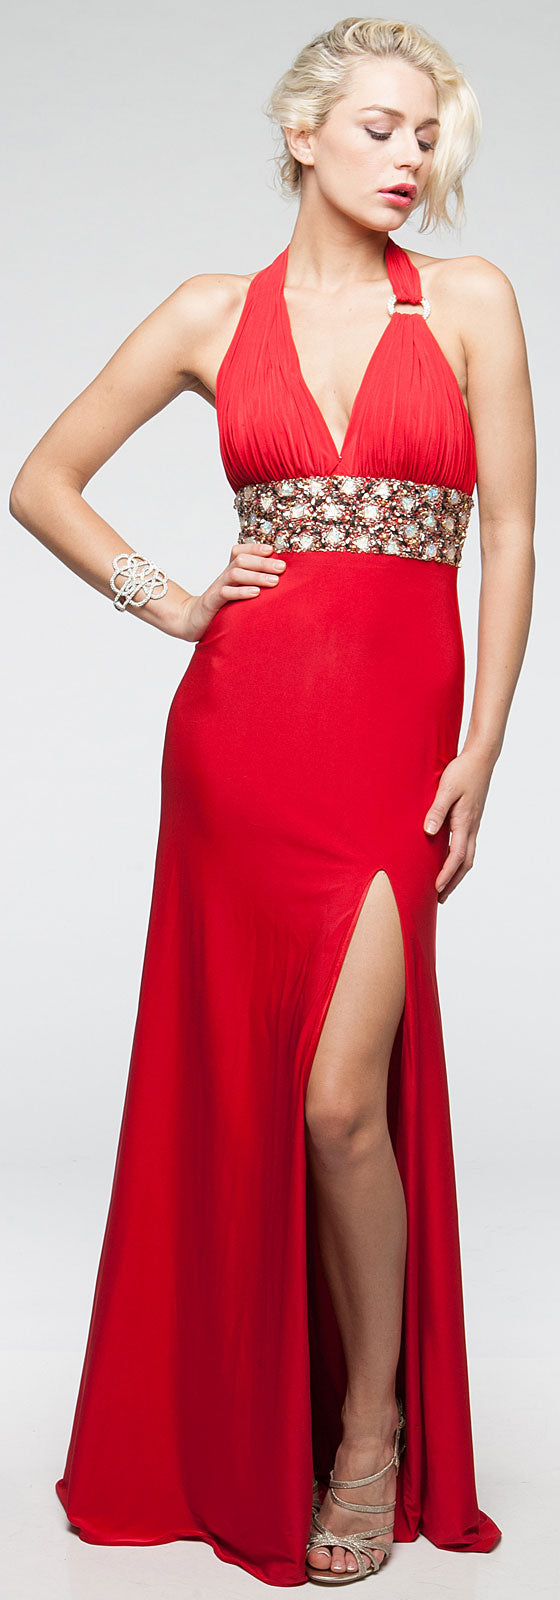 Image of Halter Neck Full Length Formal Prom Gown With Front Slit in Red